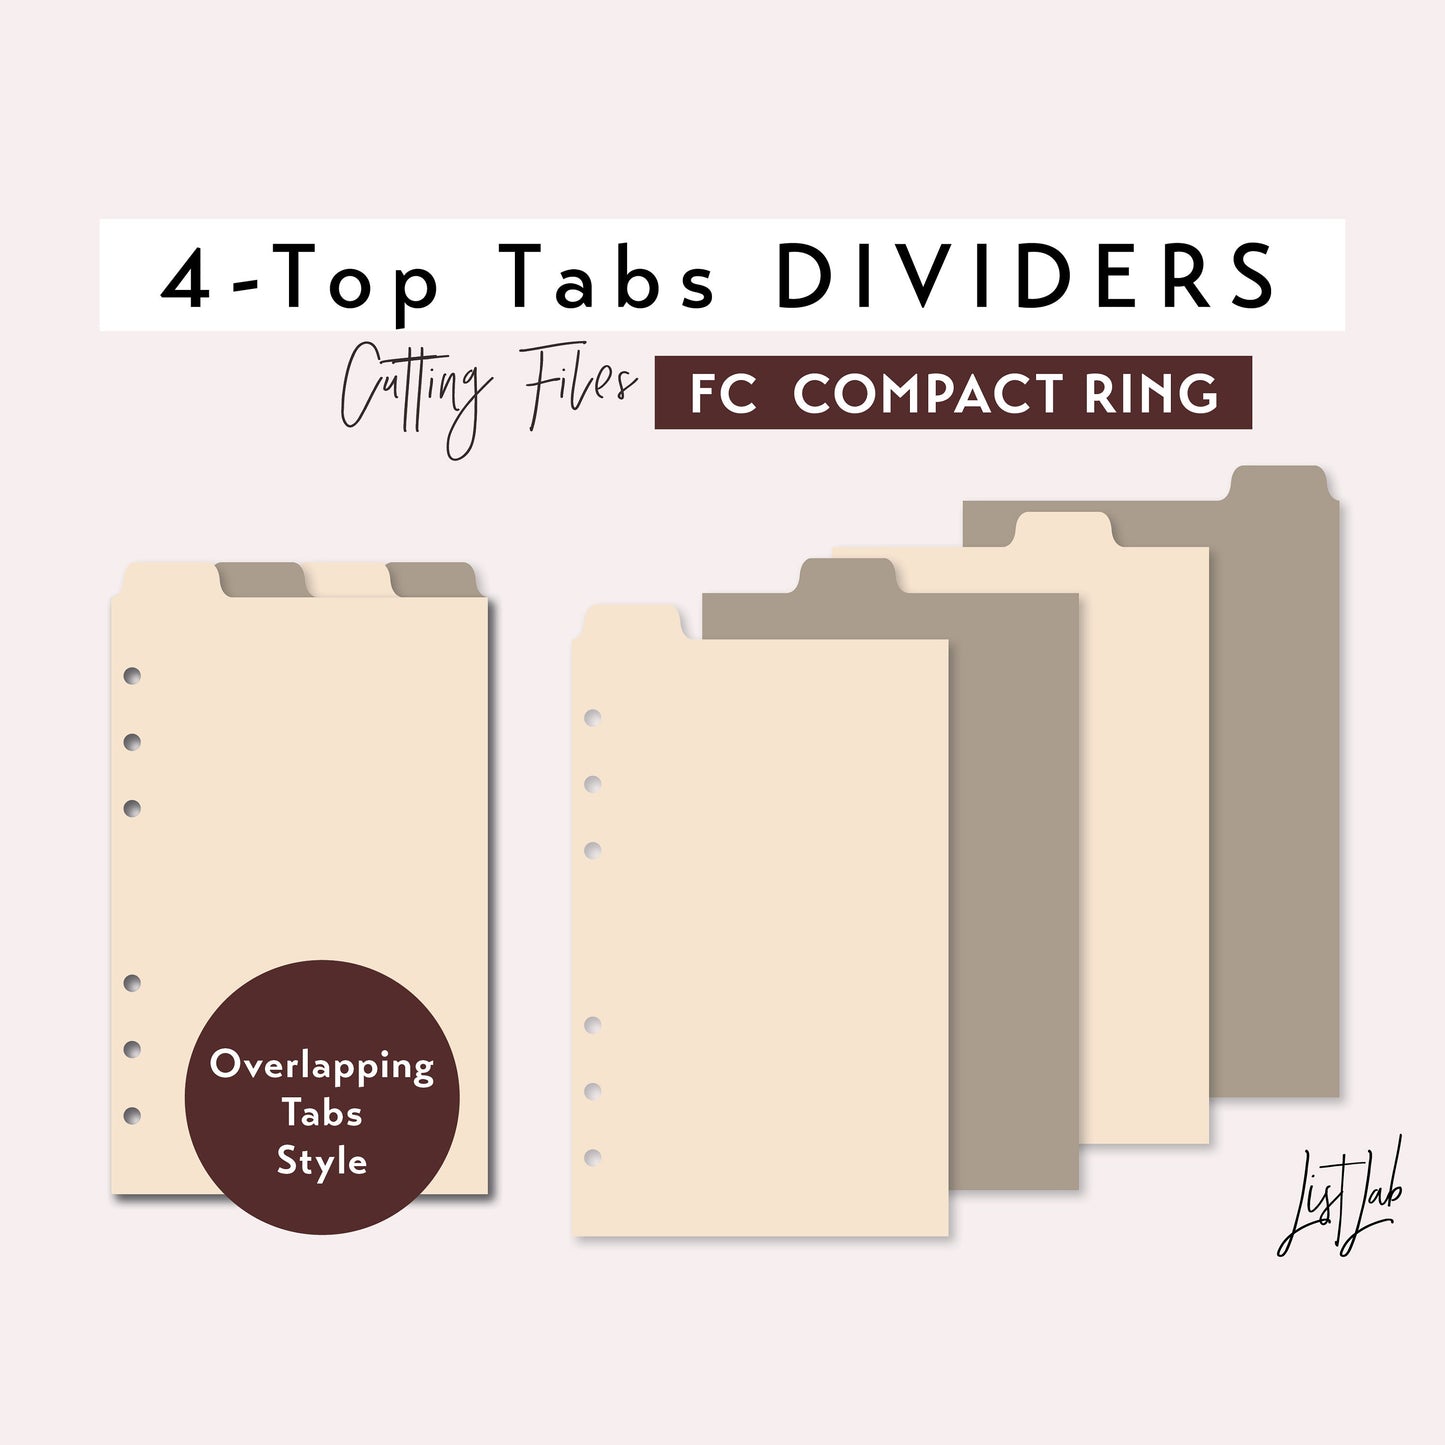 FC Compact Ring 4-TOP Tab Dividers Cutting Files Set